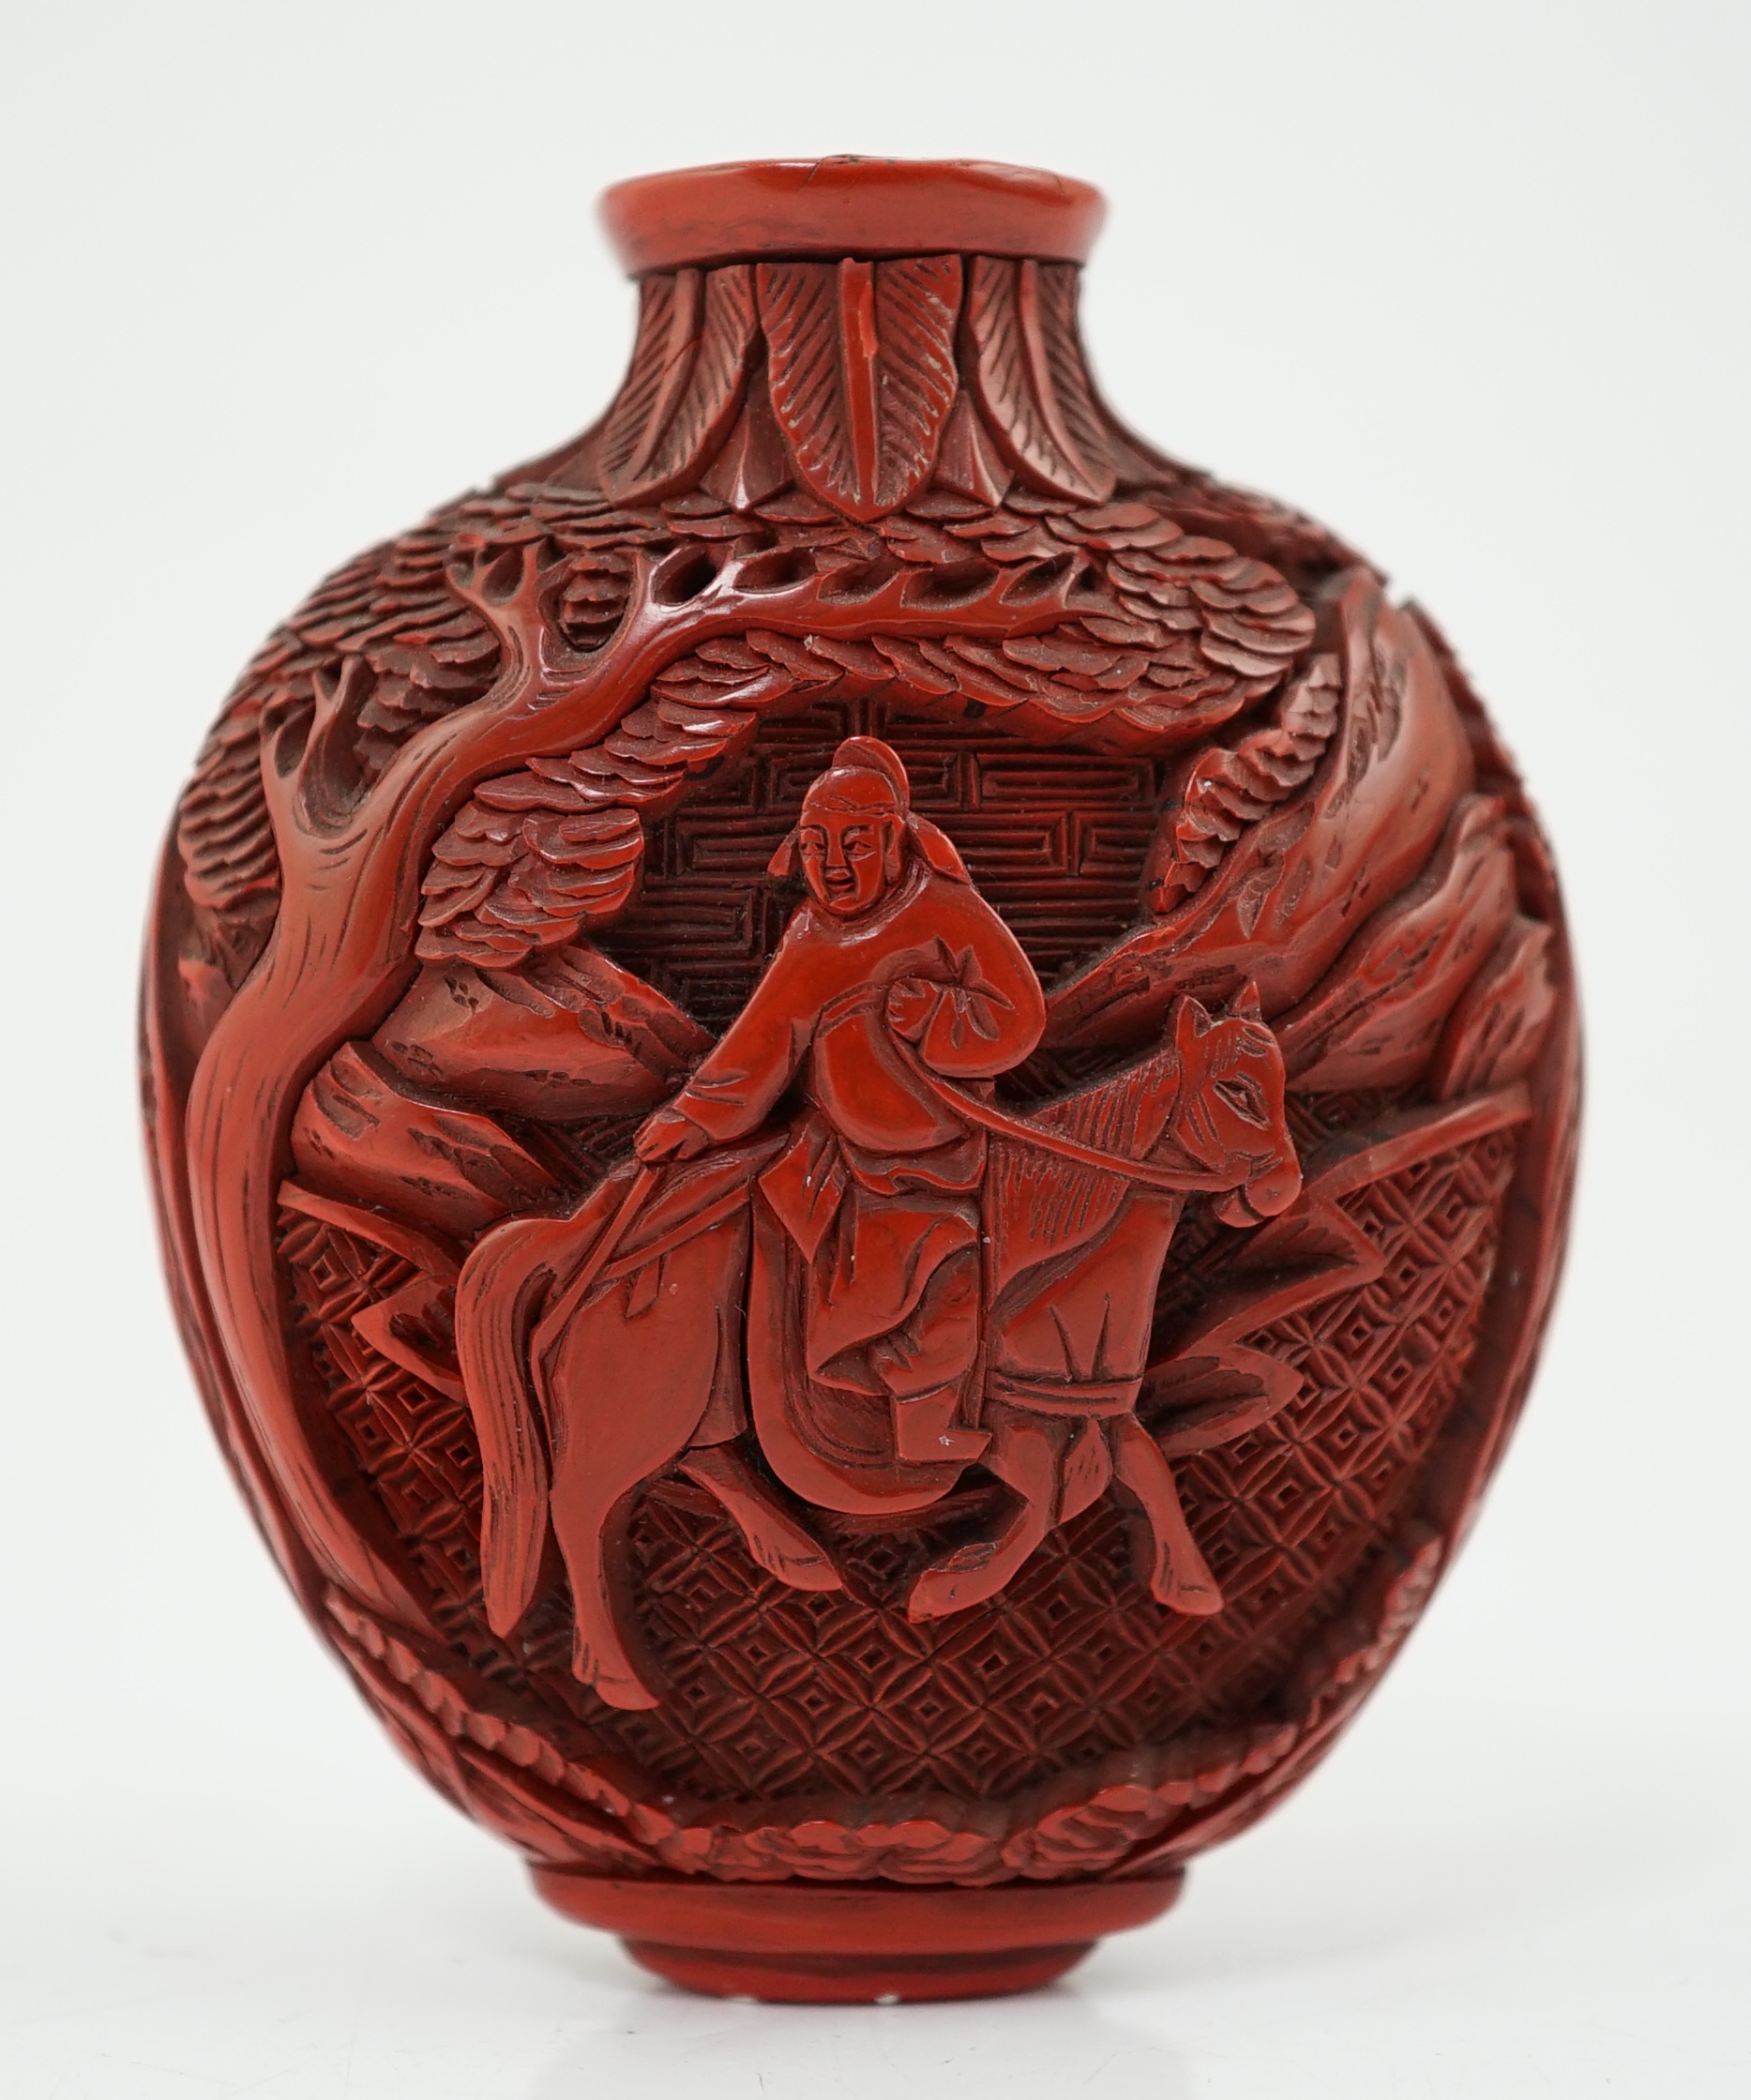 A Chinese cinnabar lacquer snuff bottle, 19th century, minor damage